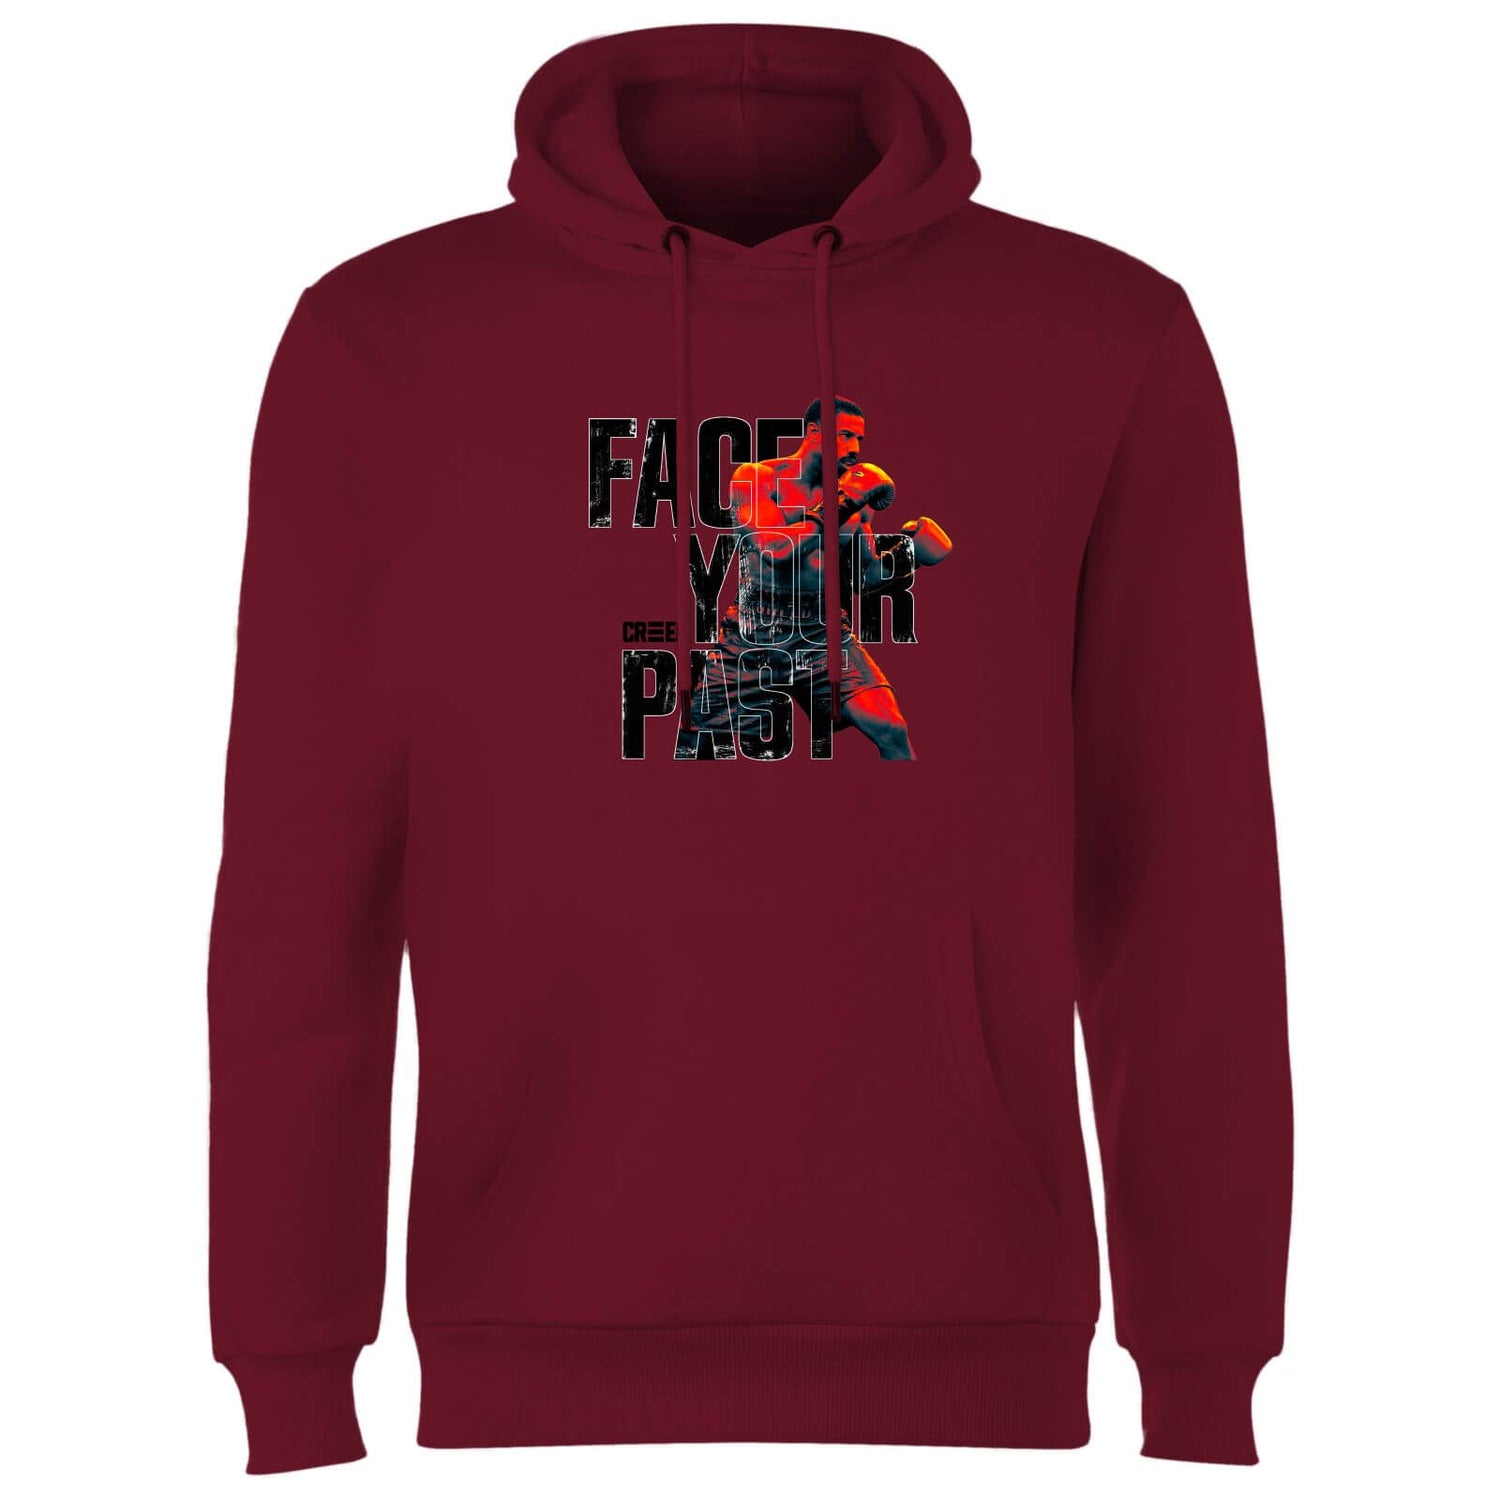 Creed Face Your Past Hoodie - Burgundy - S